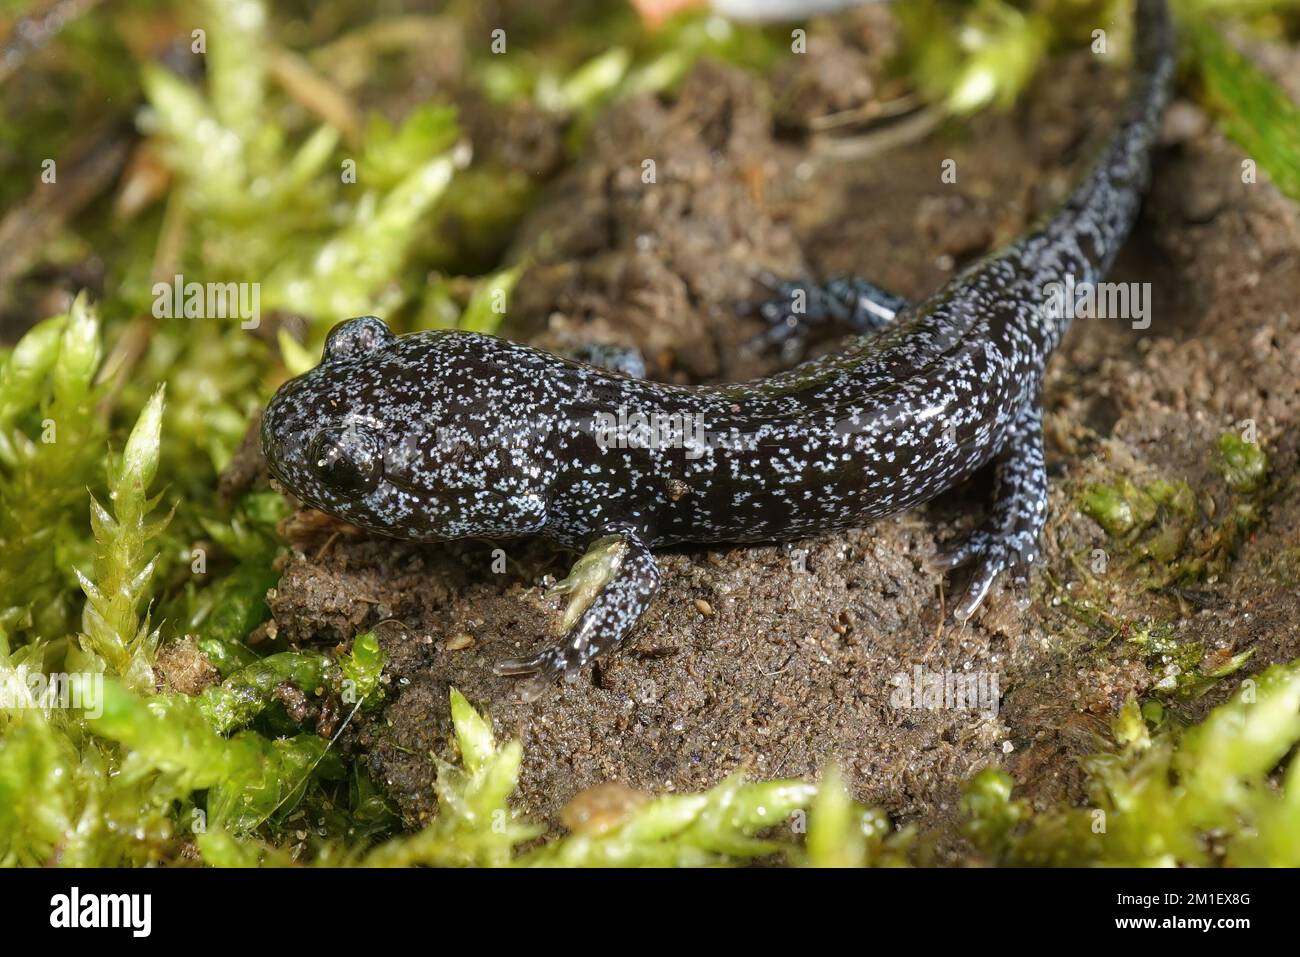 Close up on a colorful juvenile Asian Northeast Salamander, Hynobius lichenatus sitting in the grass Stock Photo